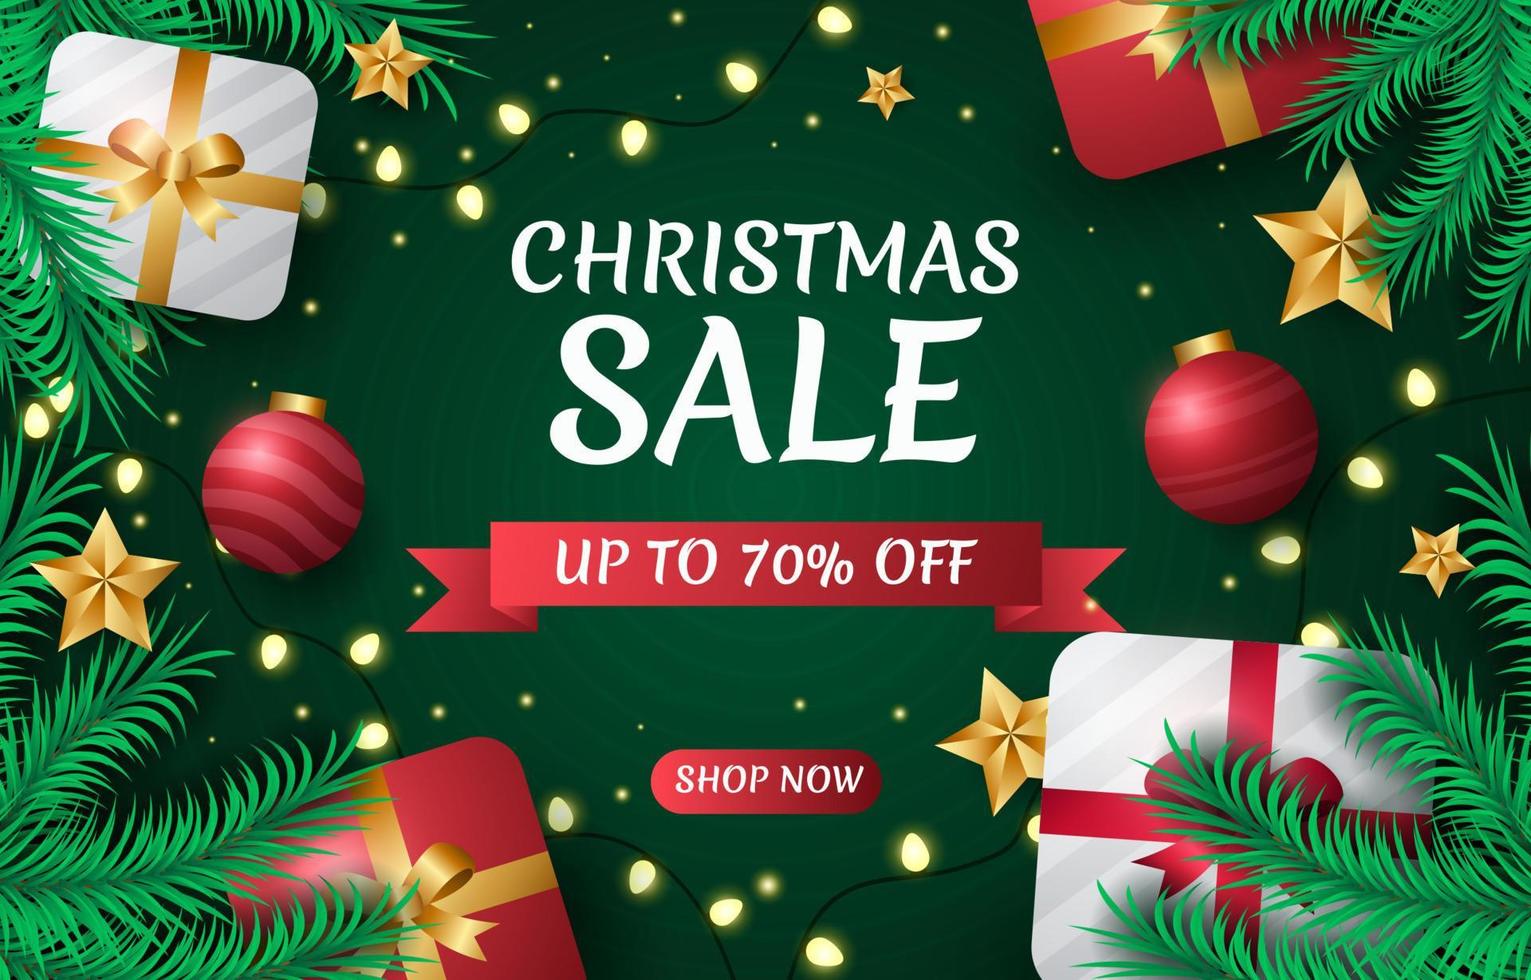 Merry Christmas Sale Poster Template vector